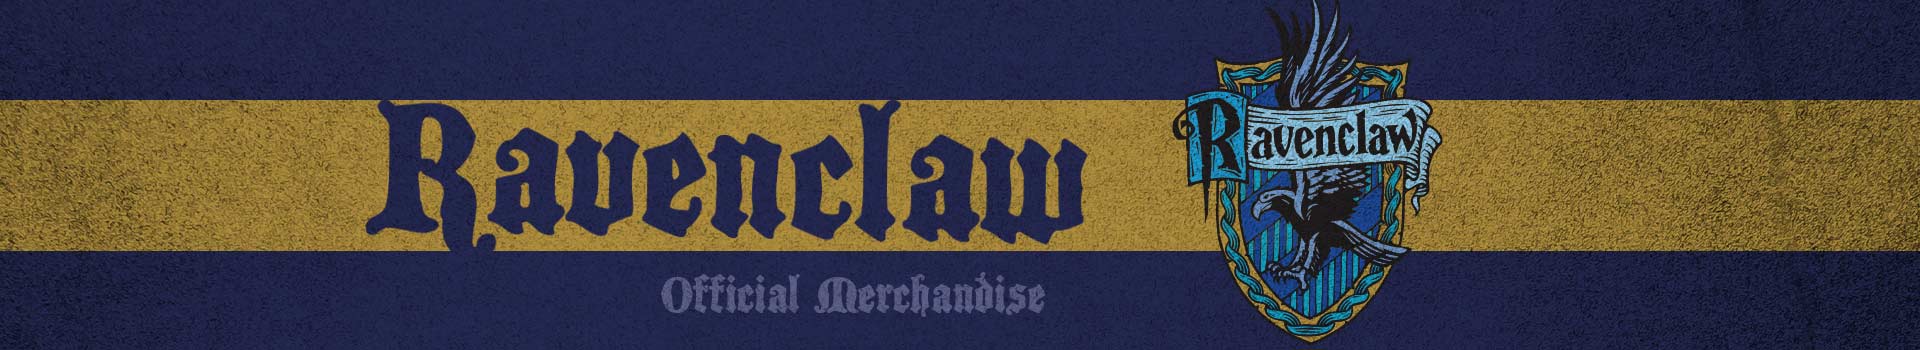 Ravenclaw - Official Merchandise